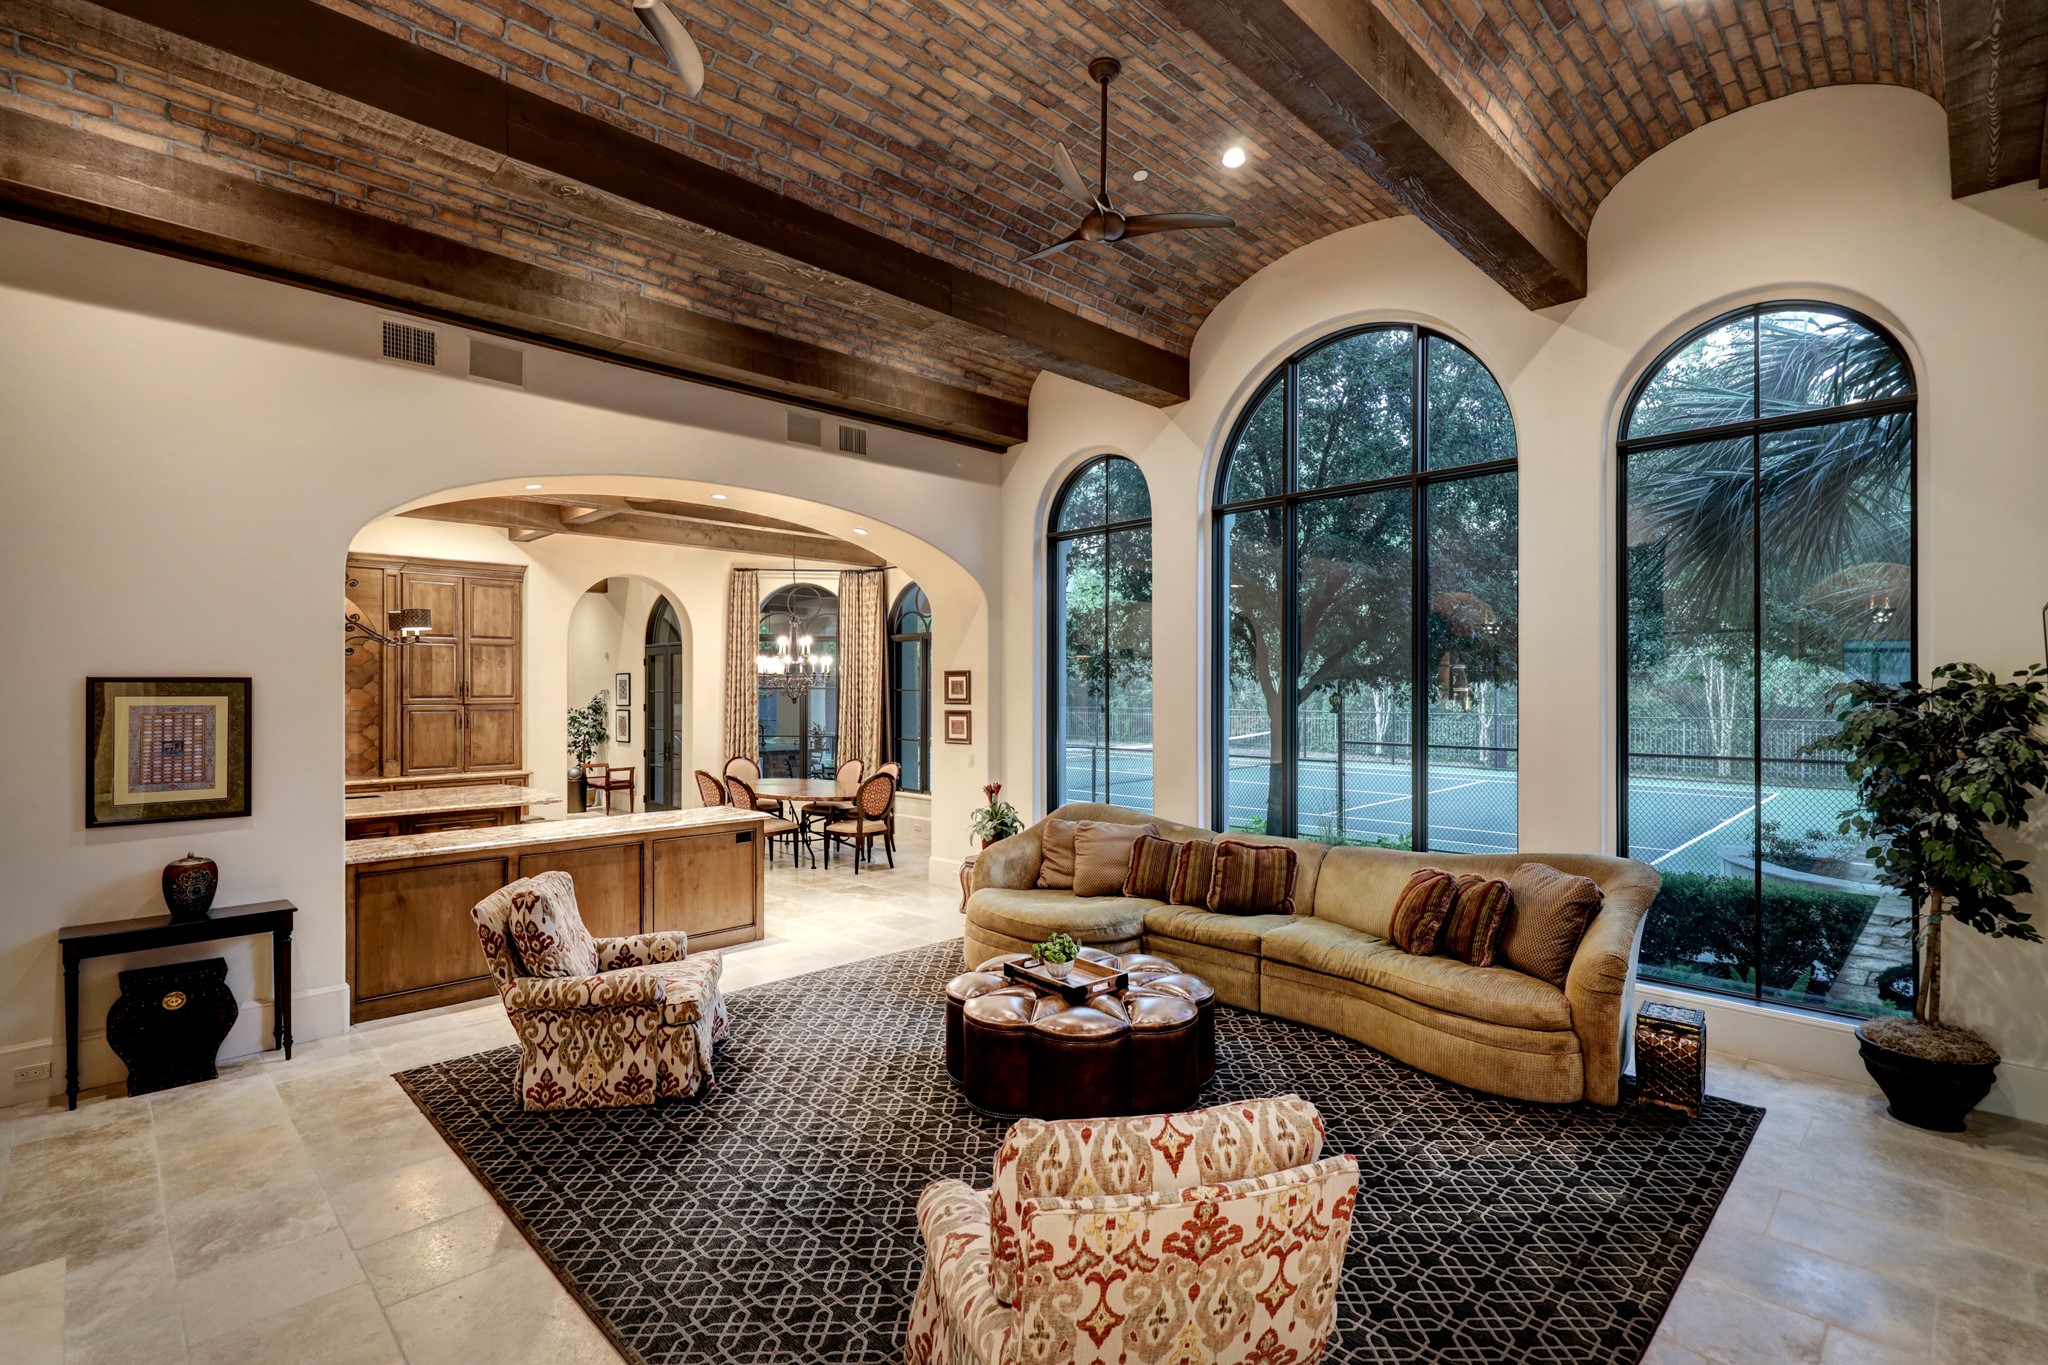 Family room open to kitchen with laid brick ceiling and bold wooden beams